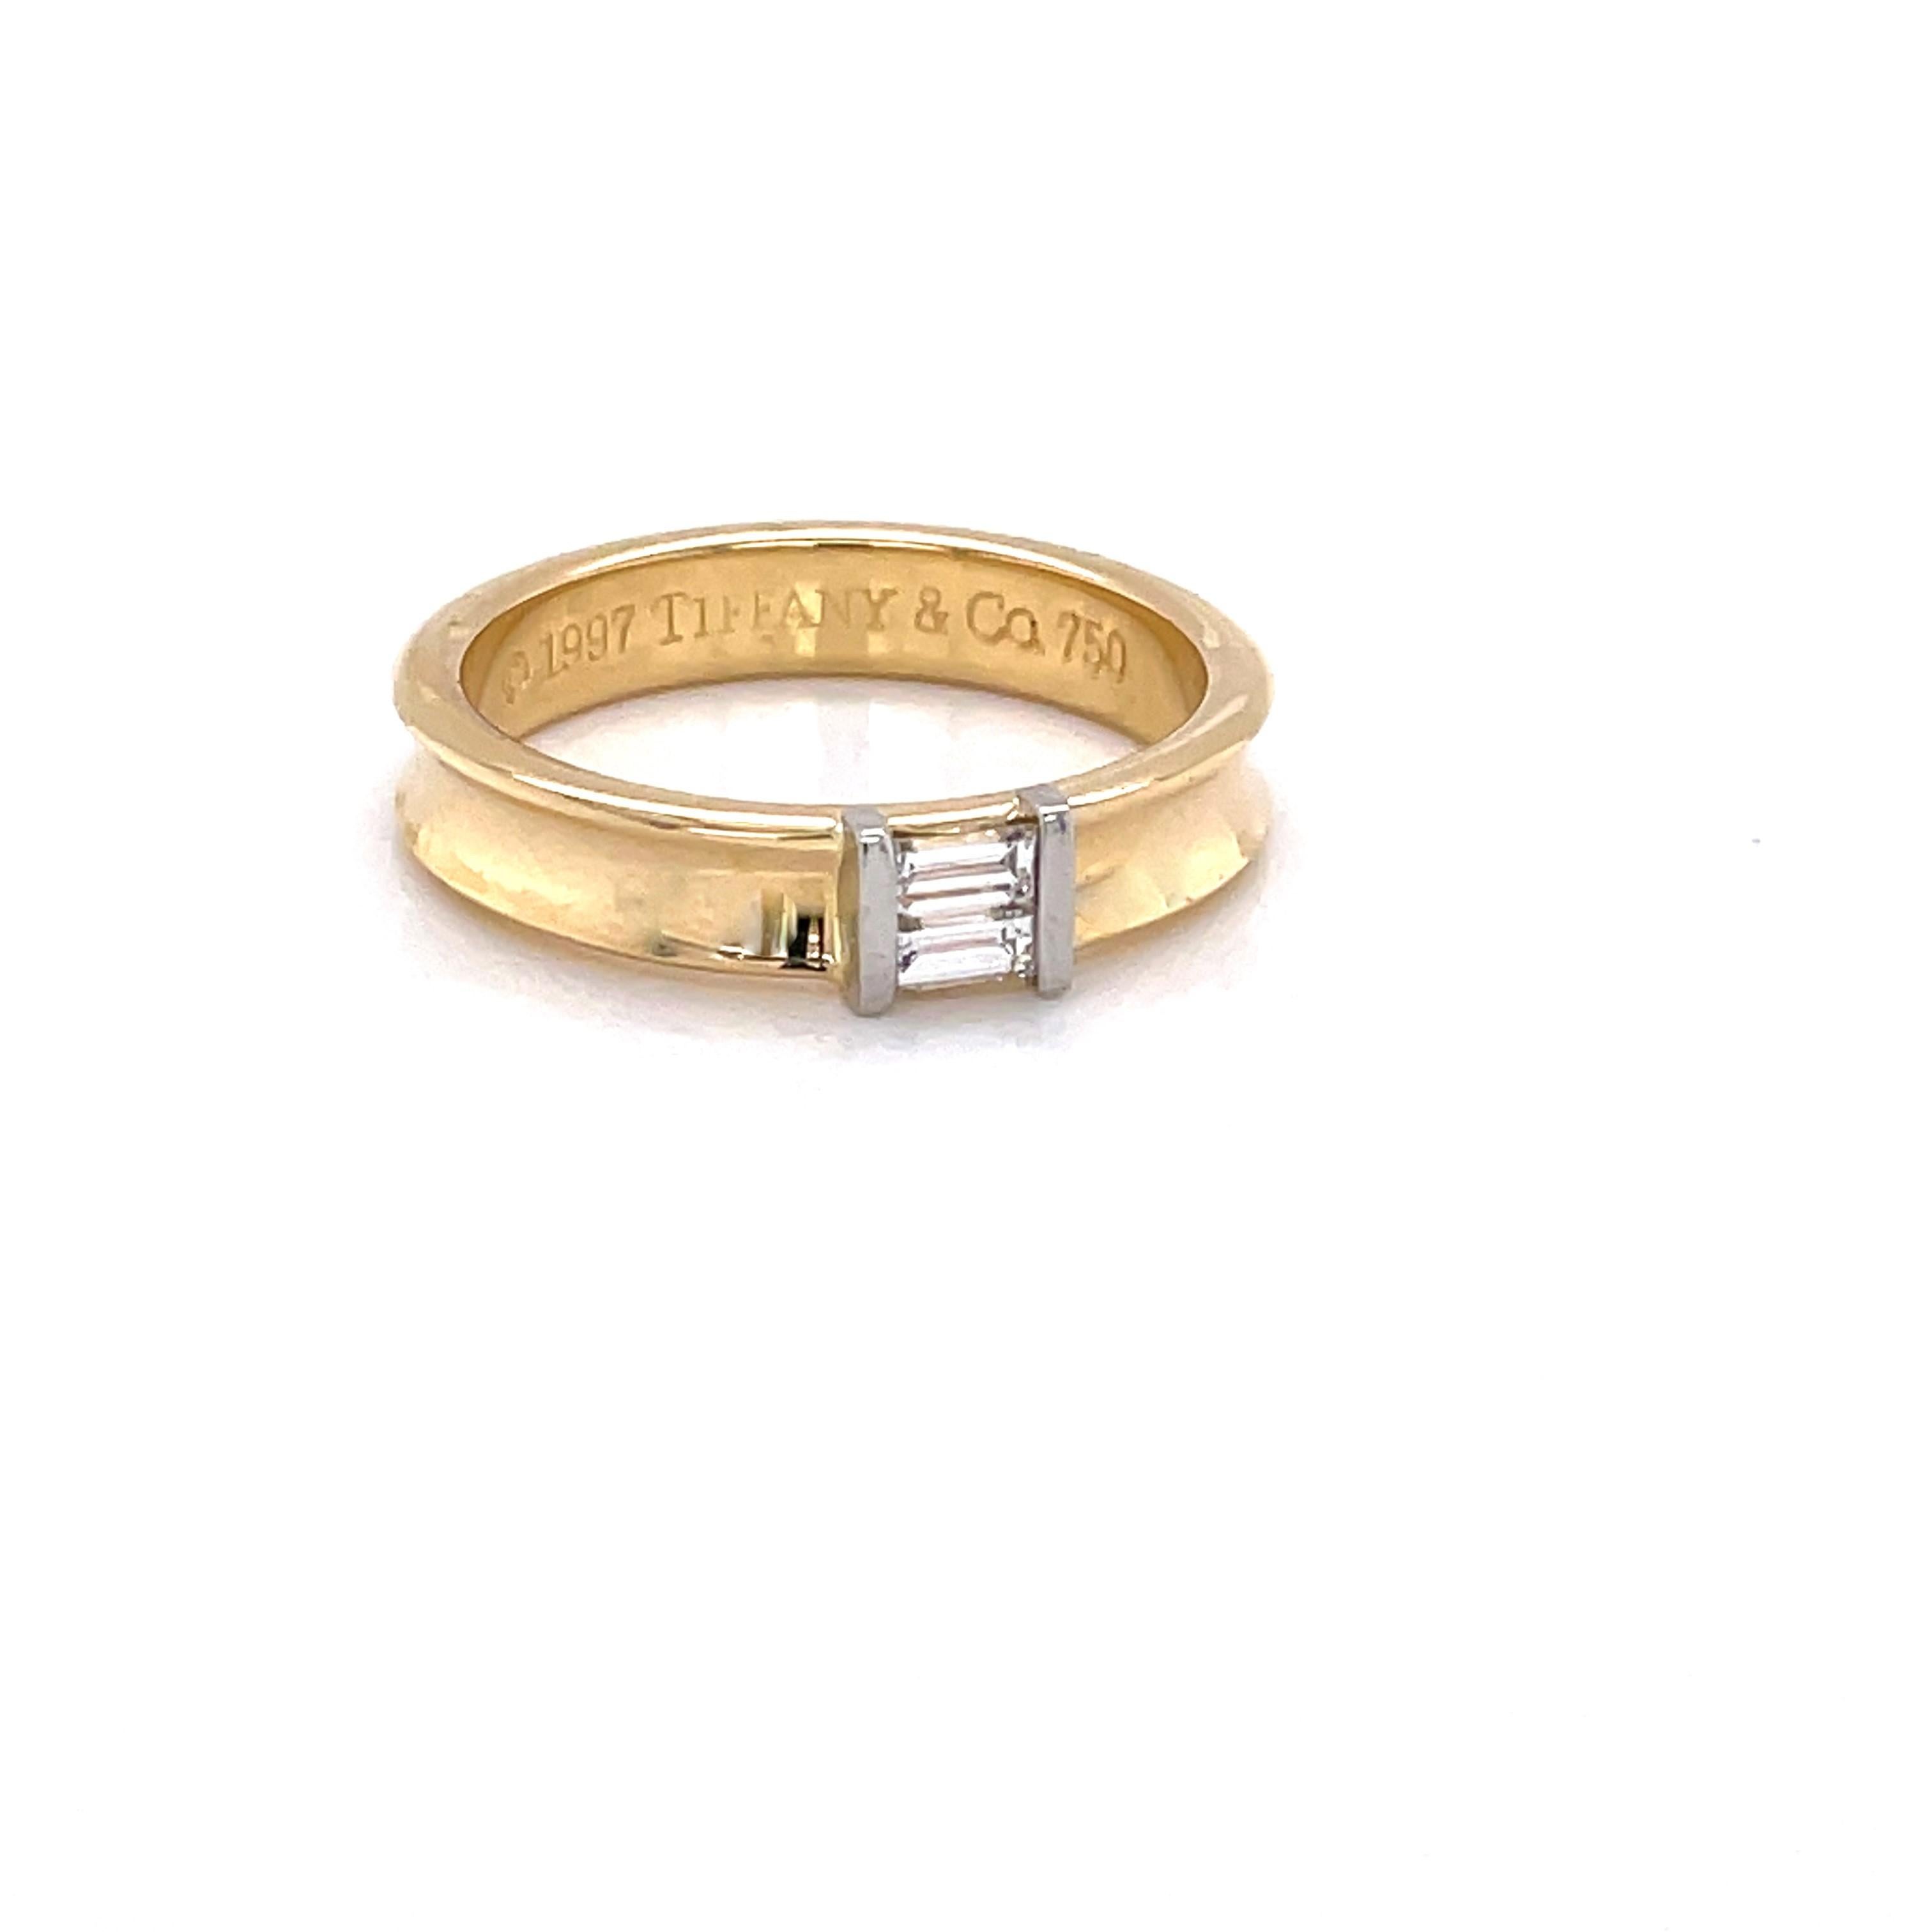 Two straight faceted cut baguette G/VS diamonds, .24 carat total weight, are center stage and set horizontally on this elegant 4.5mm contoured band ring of
 eighteen karat 18K yellow gold by Tiffany & Co. In ring size 10 and sizable. Stamped 750 and